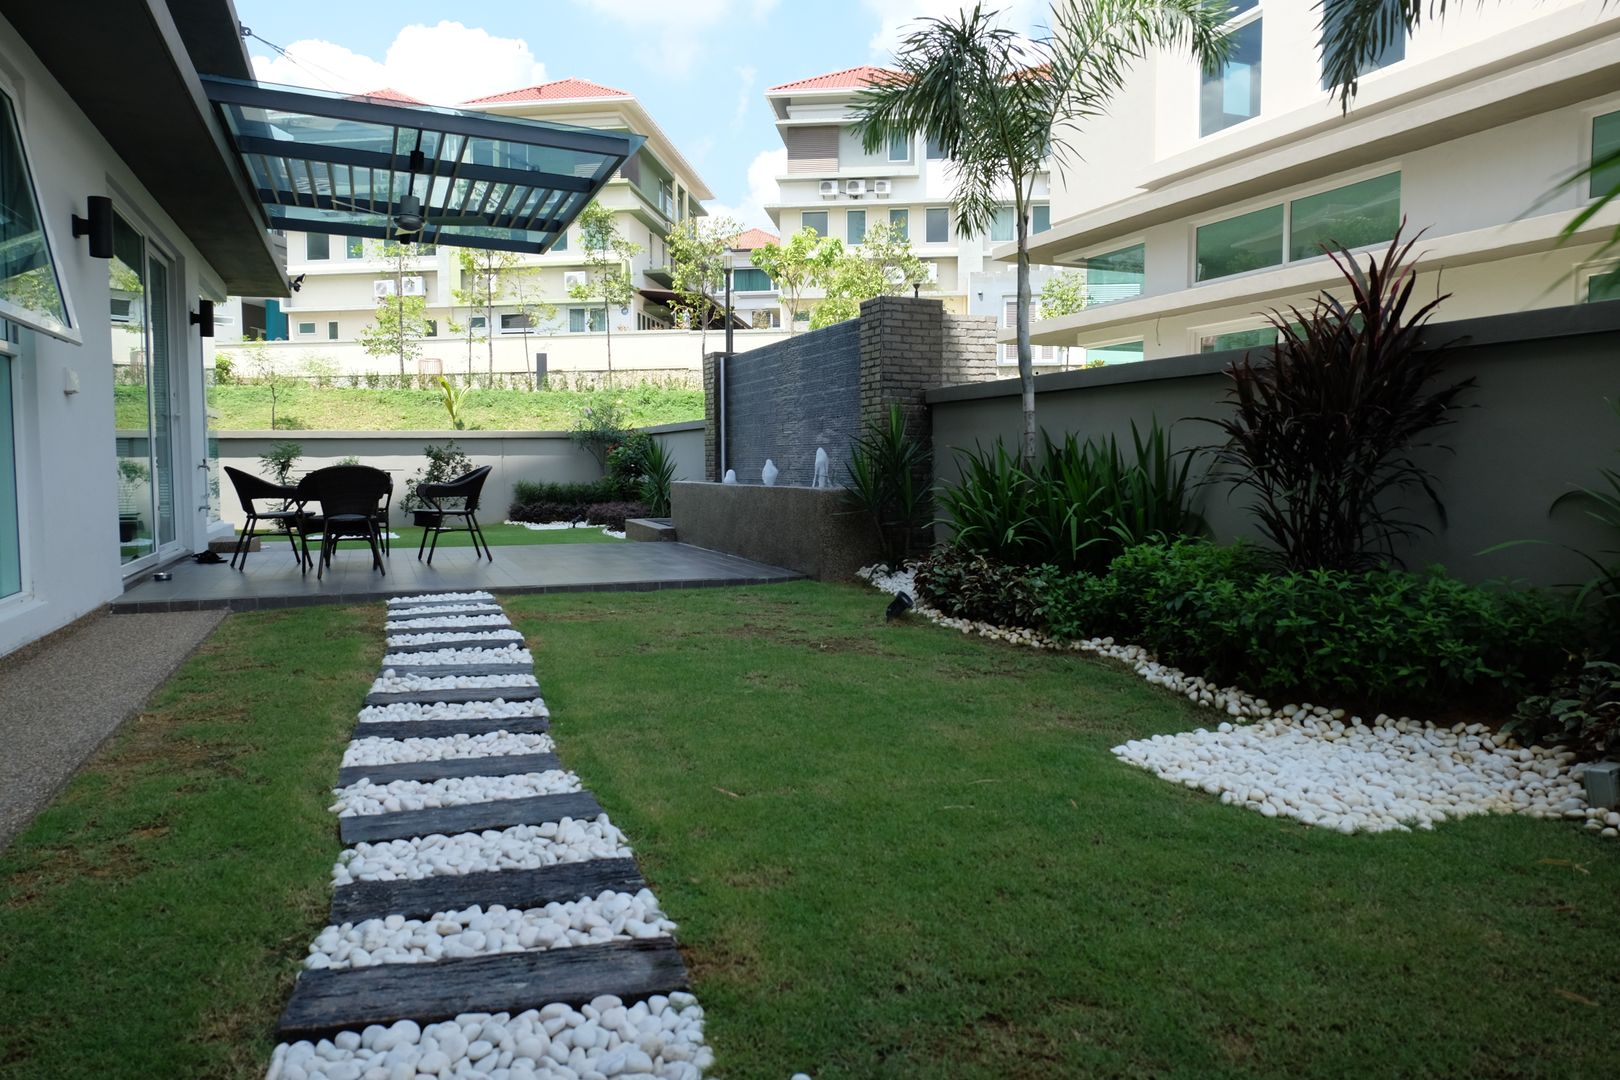 Contemporary Tropical , 3-Storey semi-D, inDfinity Design (M) SDN BHD inDfinity Design (M) SDN BHD حديقة